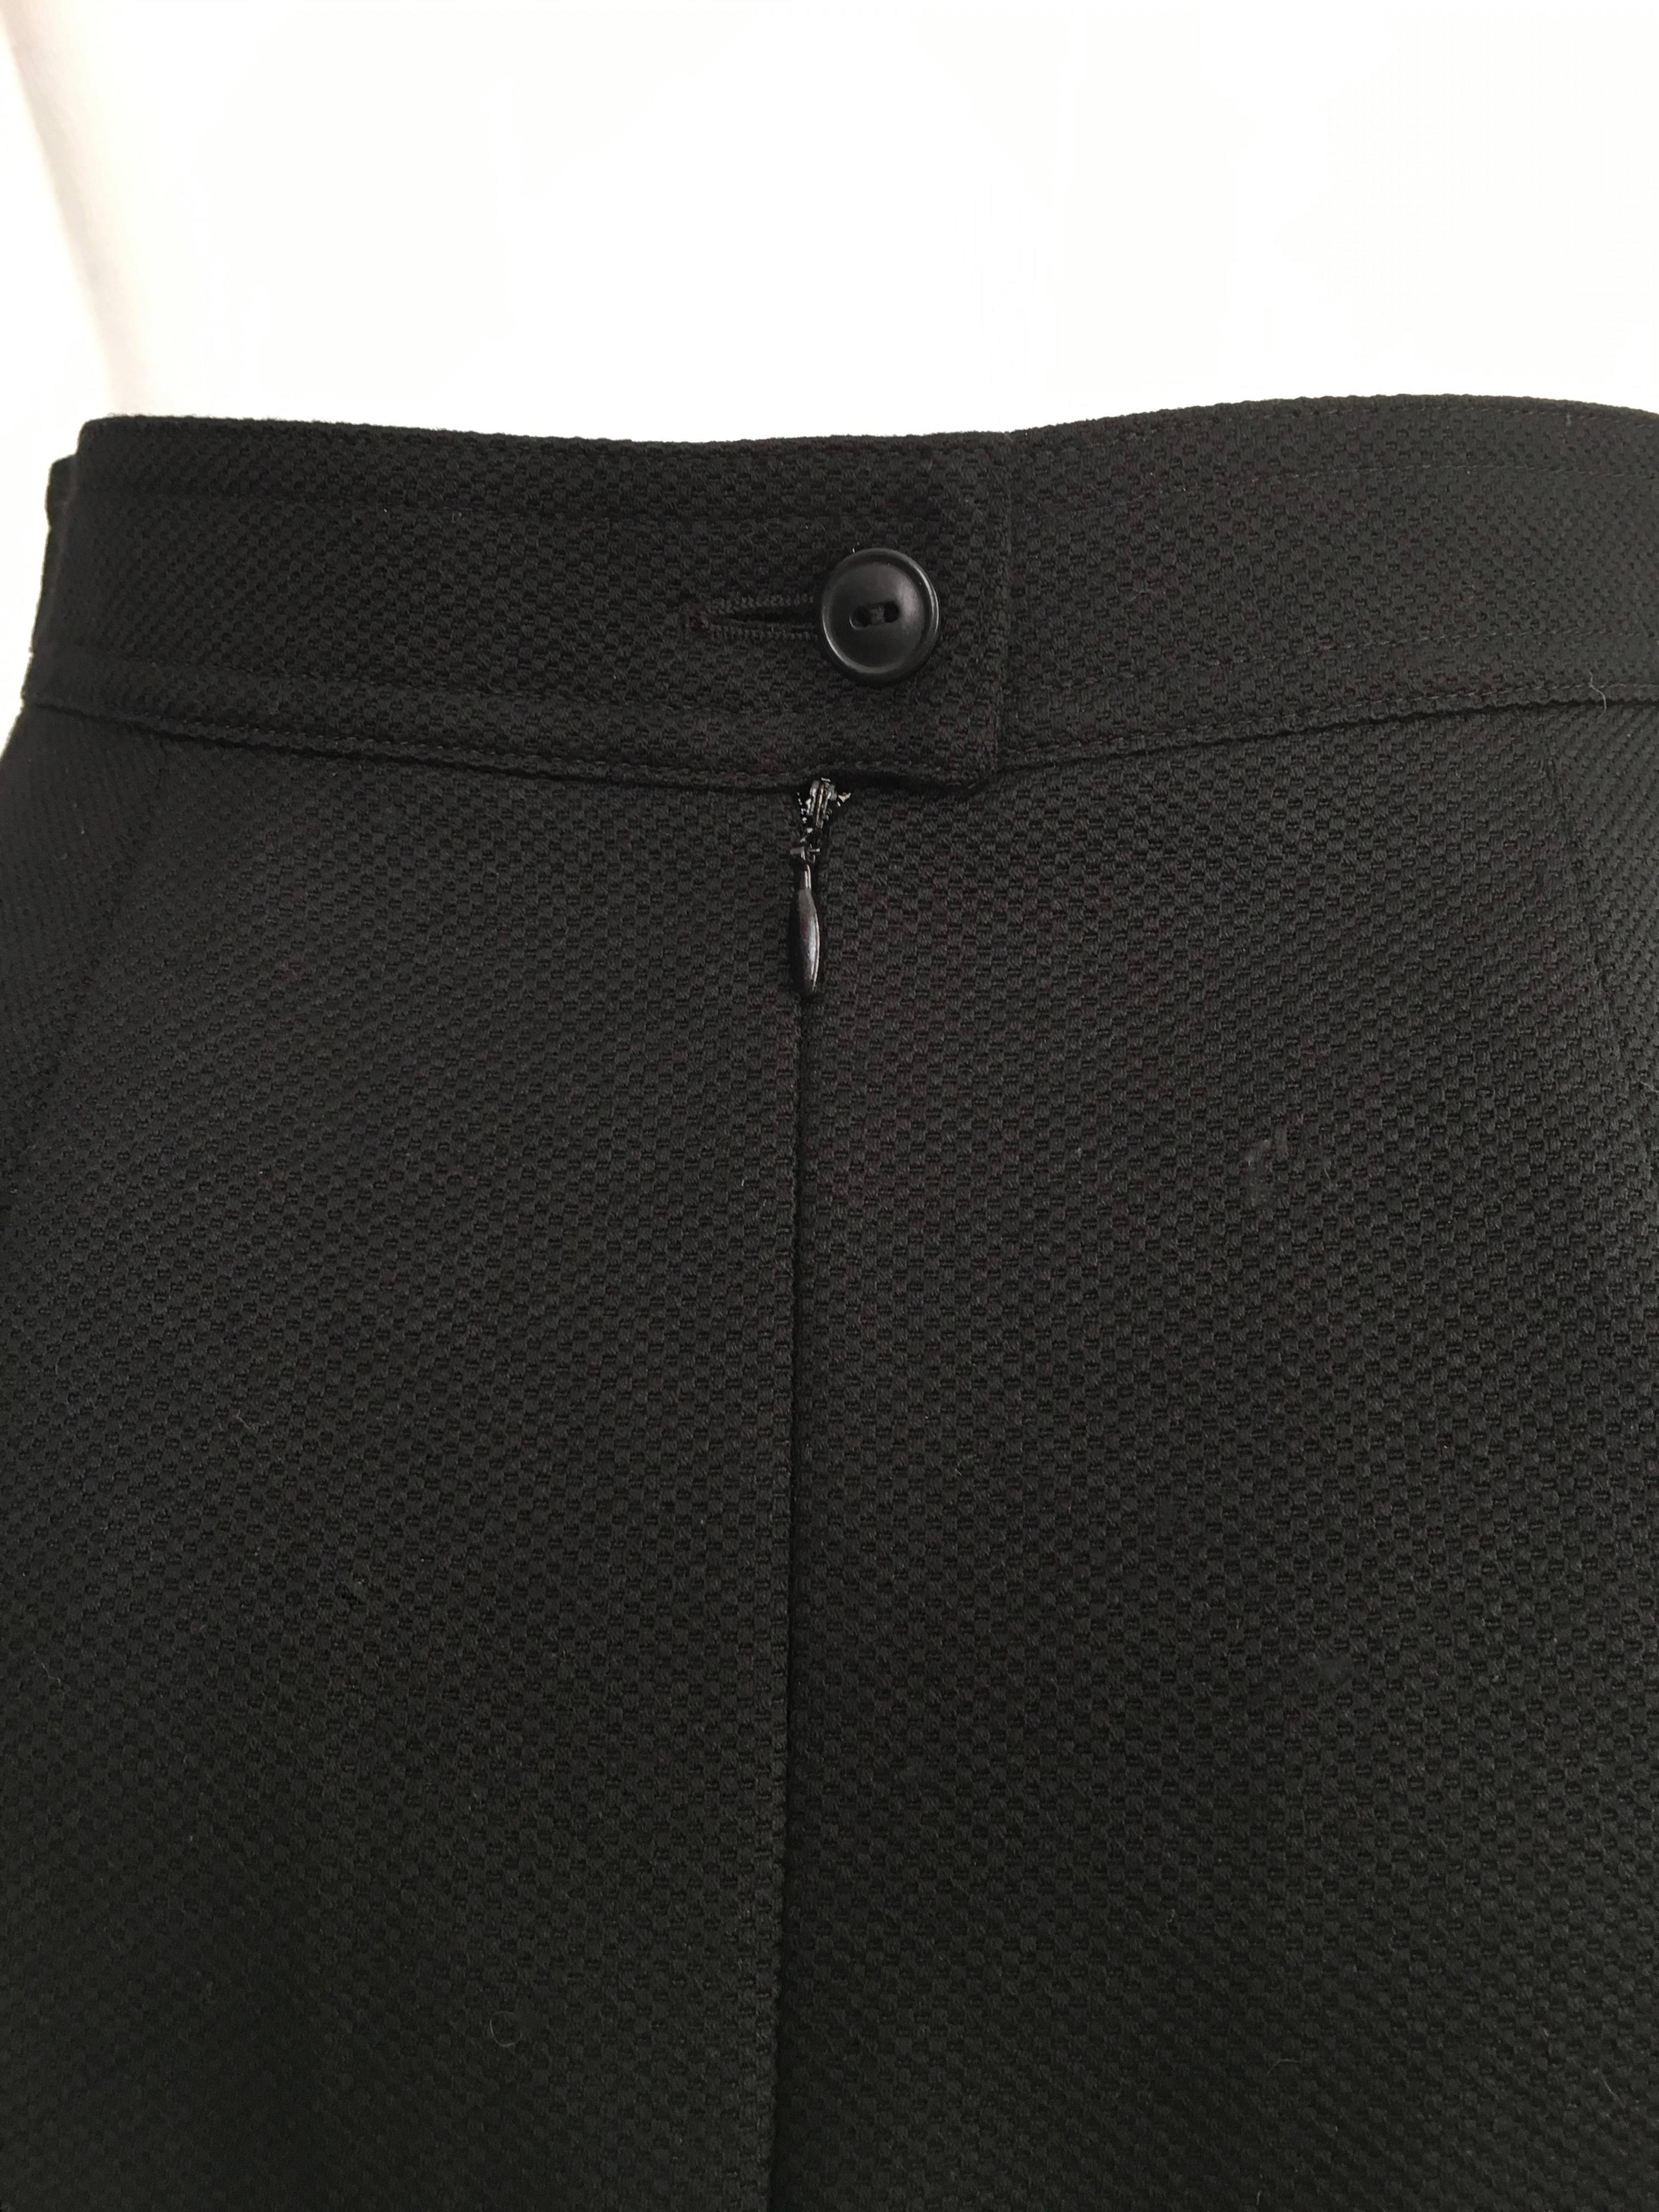 Karl Lagerfeld 1990s Black Wool Pencil Skirt Size 6. For Sale 5